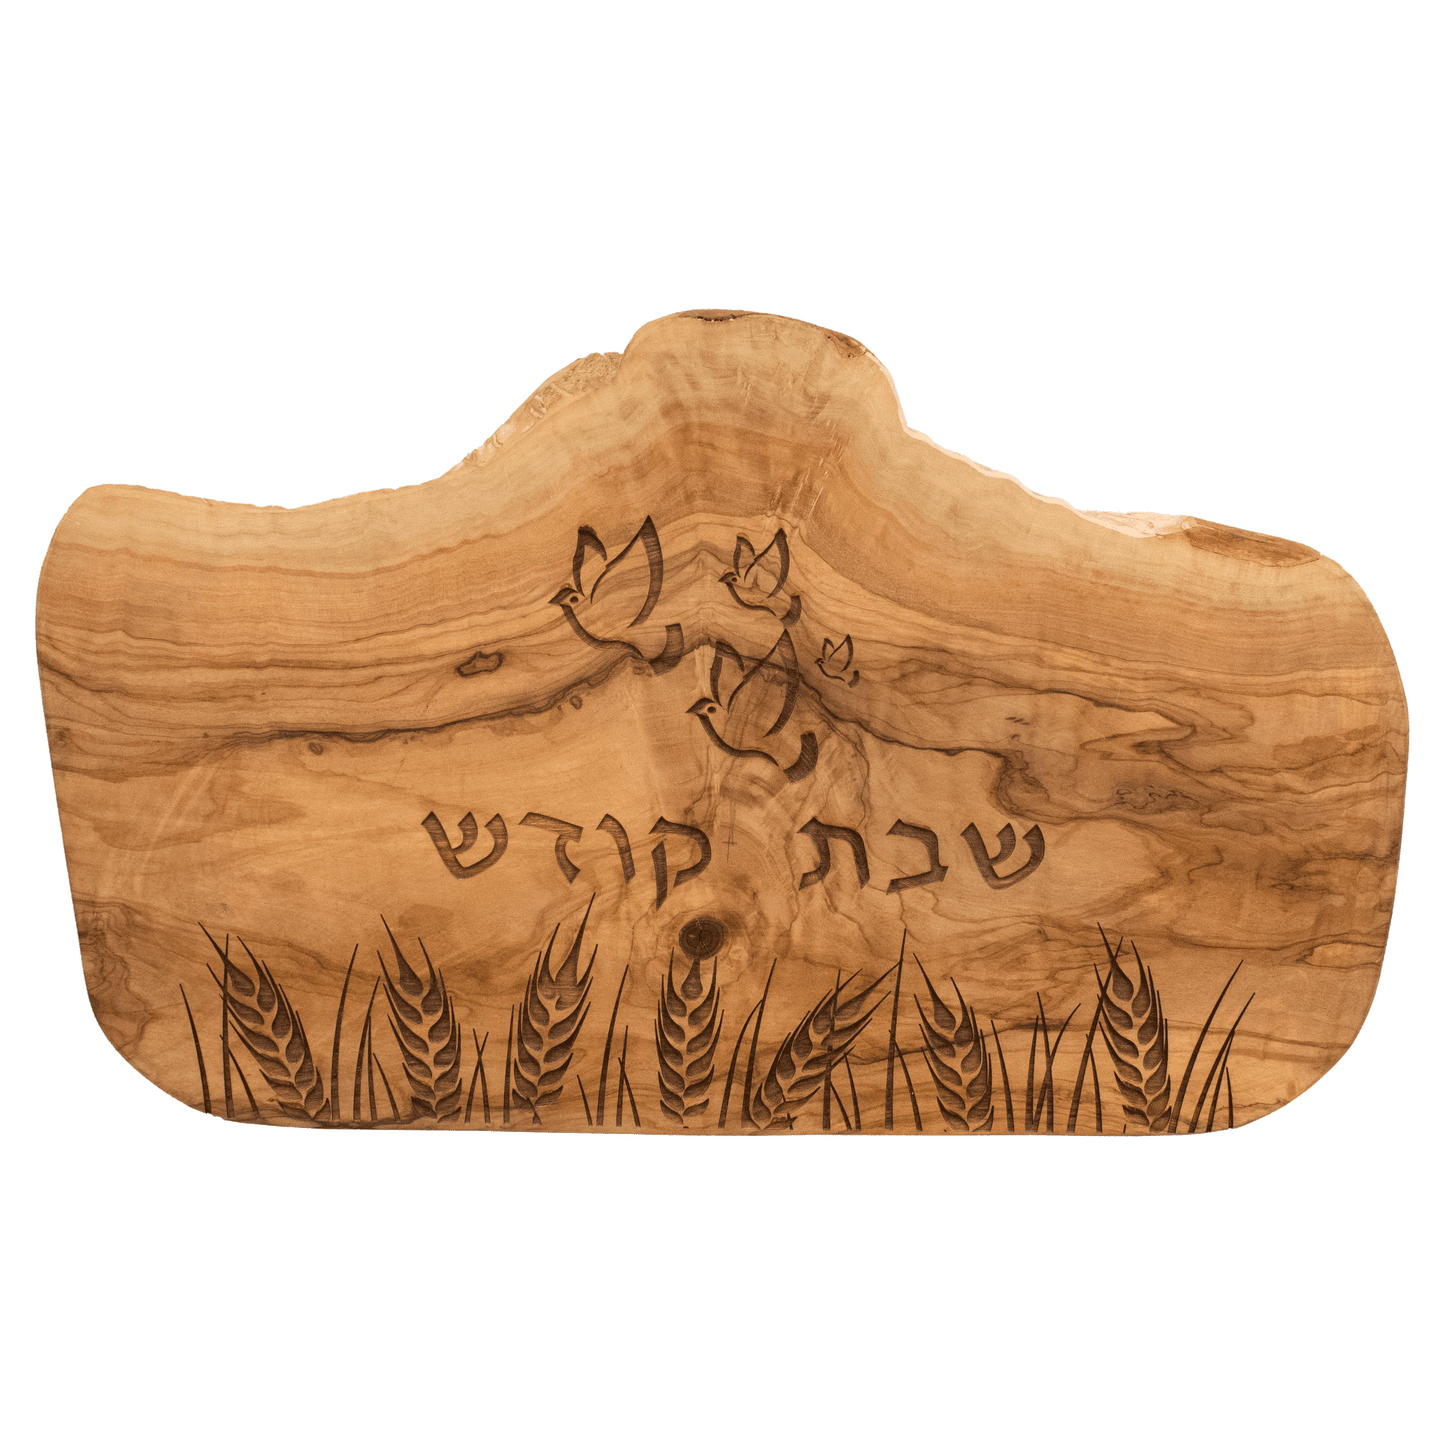 Olive Wood Serving Board with carved doves and "Holy Shabbat" in Hebrew between doves and wheat motif